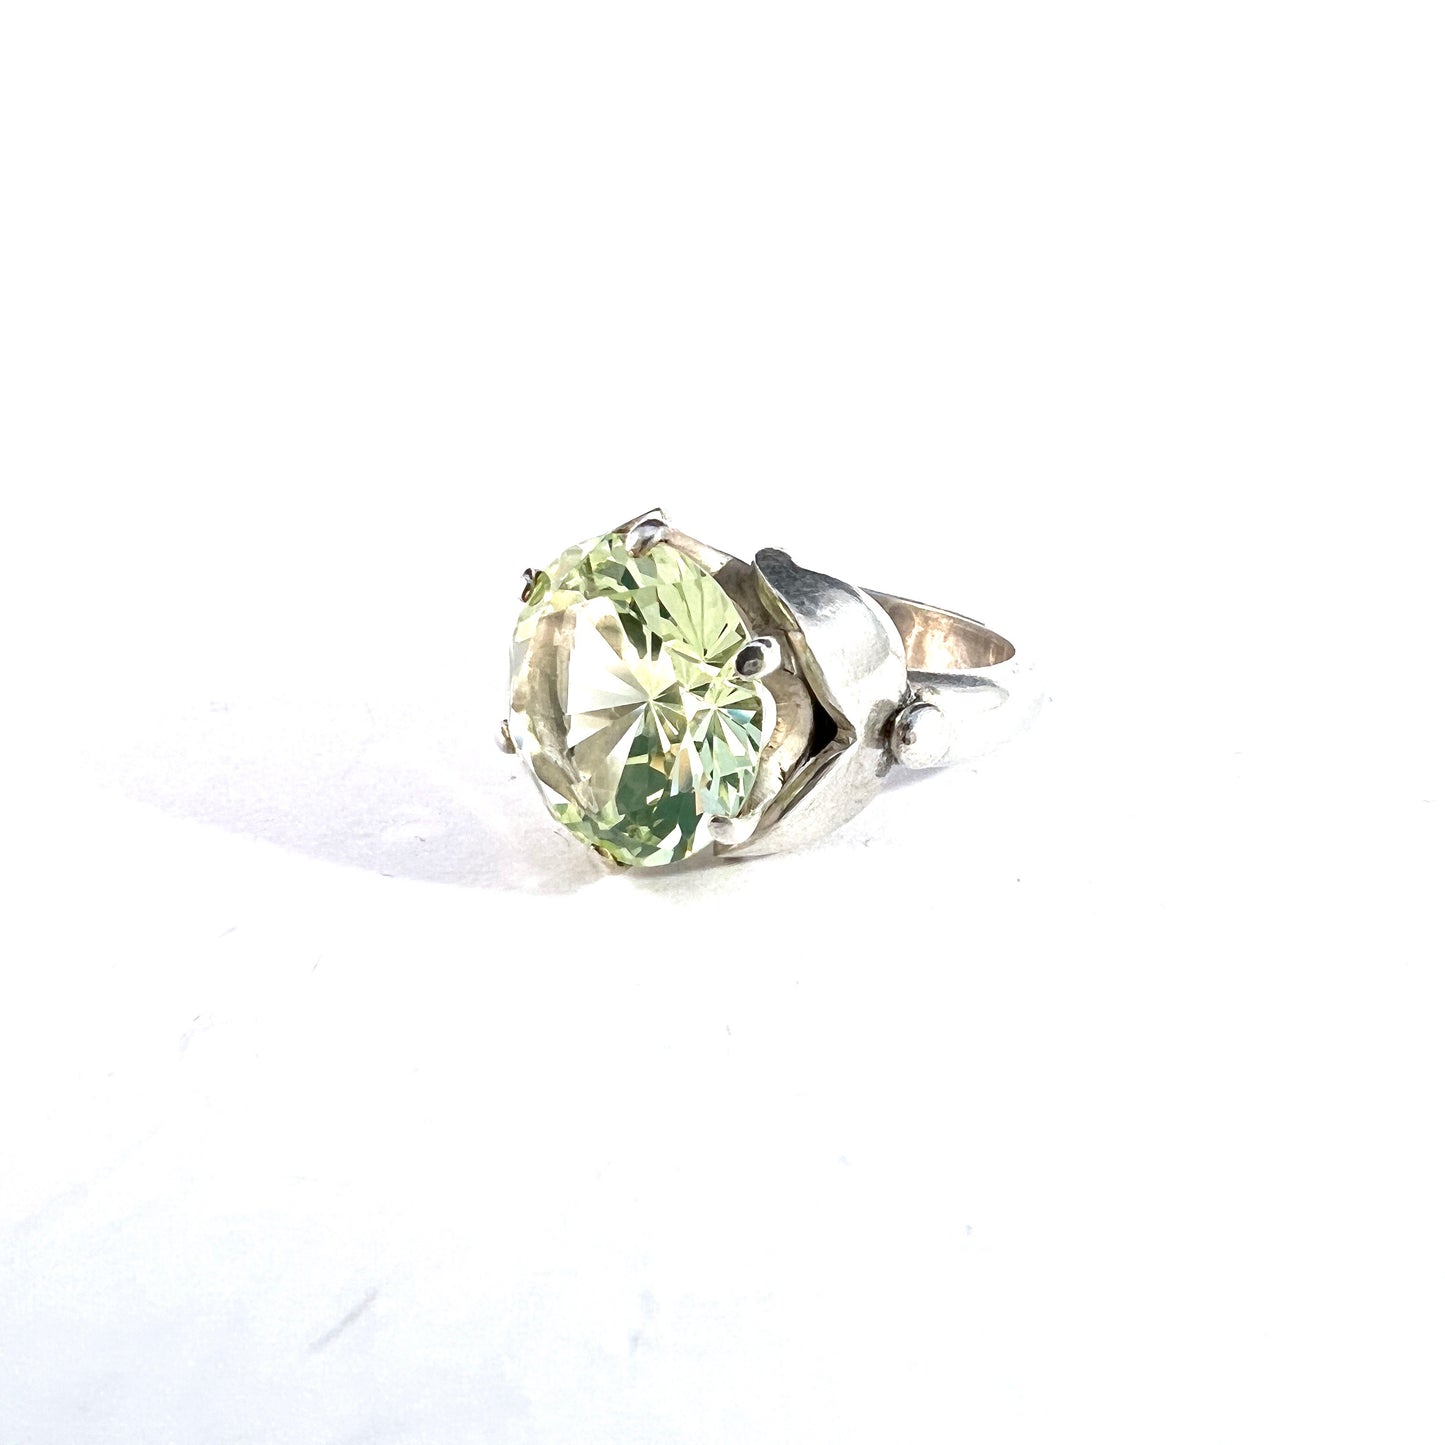 Taxco, Mexico. Vintage Sterling Silver Uranium Glass Ring